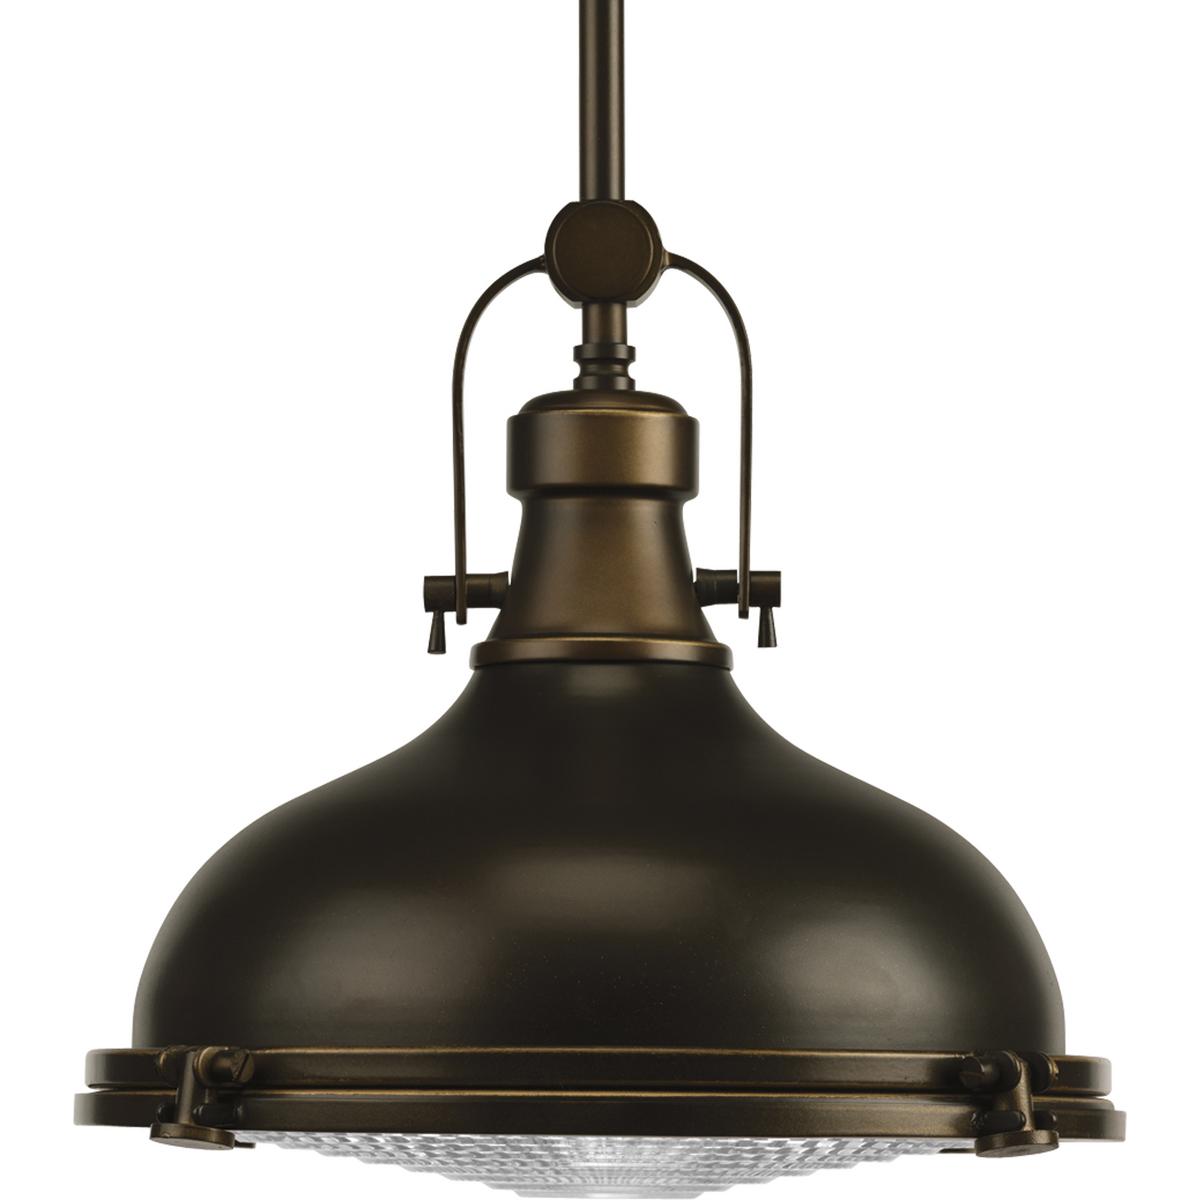 Hubbell P5188-108 The one-light 12" LED pendant features industrial roots in both form and function. The Oil Rubbed Bronze finish highlight the high-quality prismatic glass which adds to the historical aesthetic. Antique style fixture includes a hinge-locking nautical desi